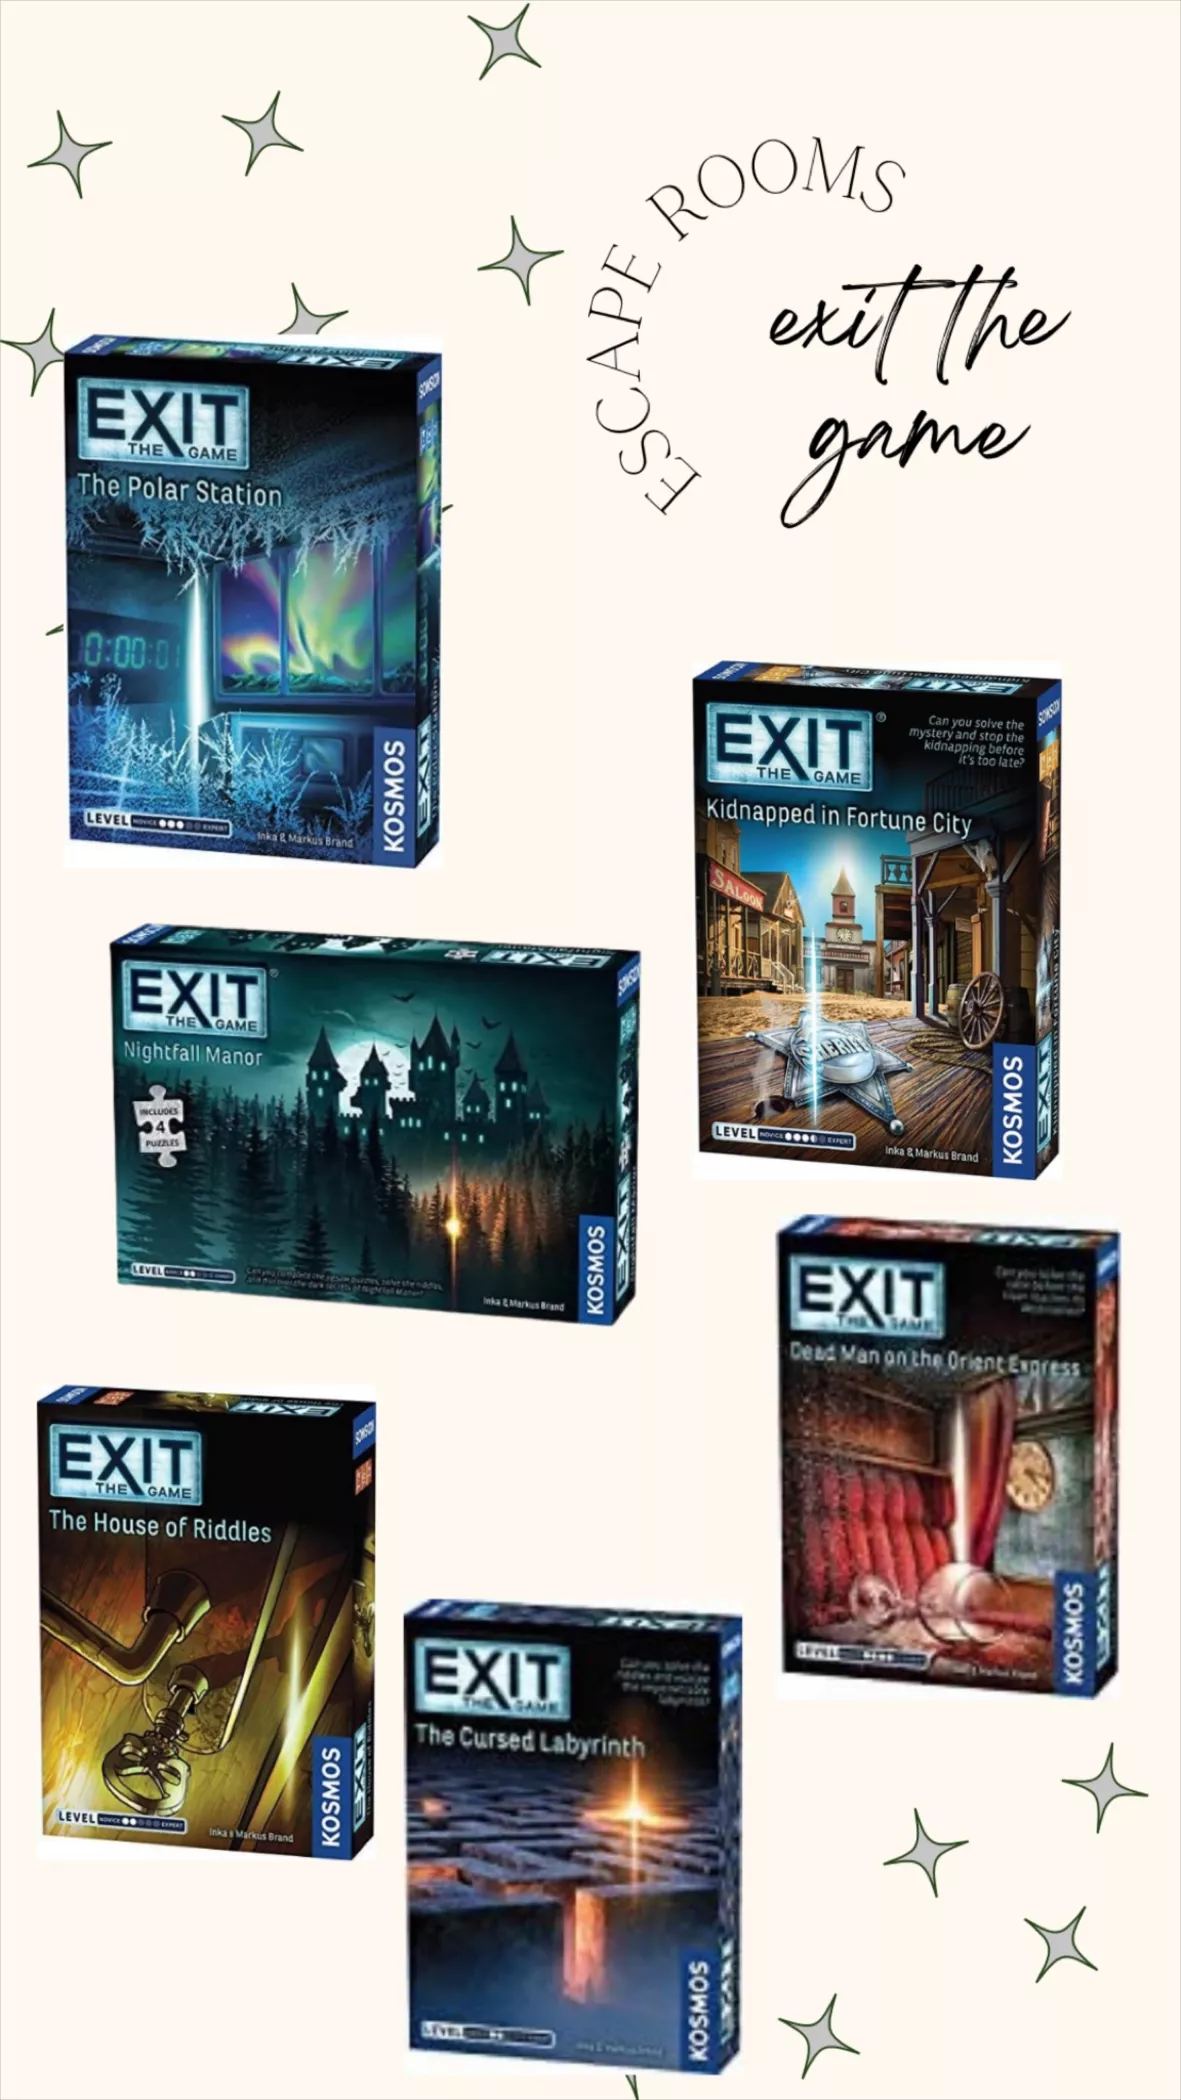  Dead Man on The Orient Express, Exit: The Game - A Kosmos Game